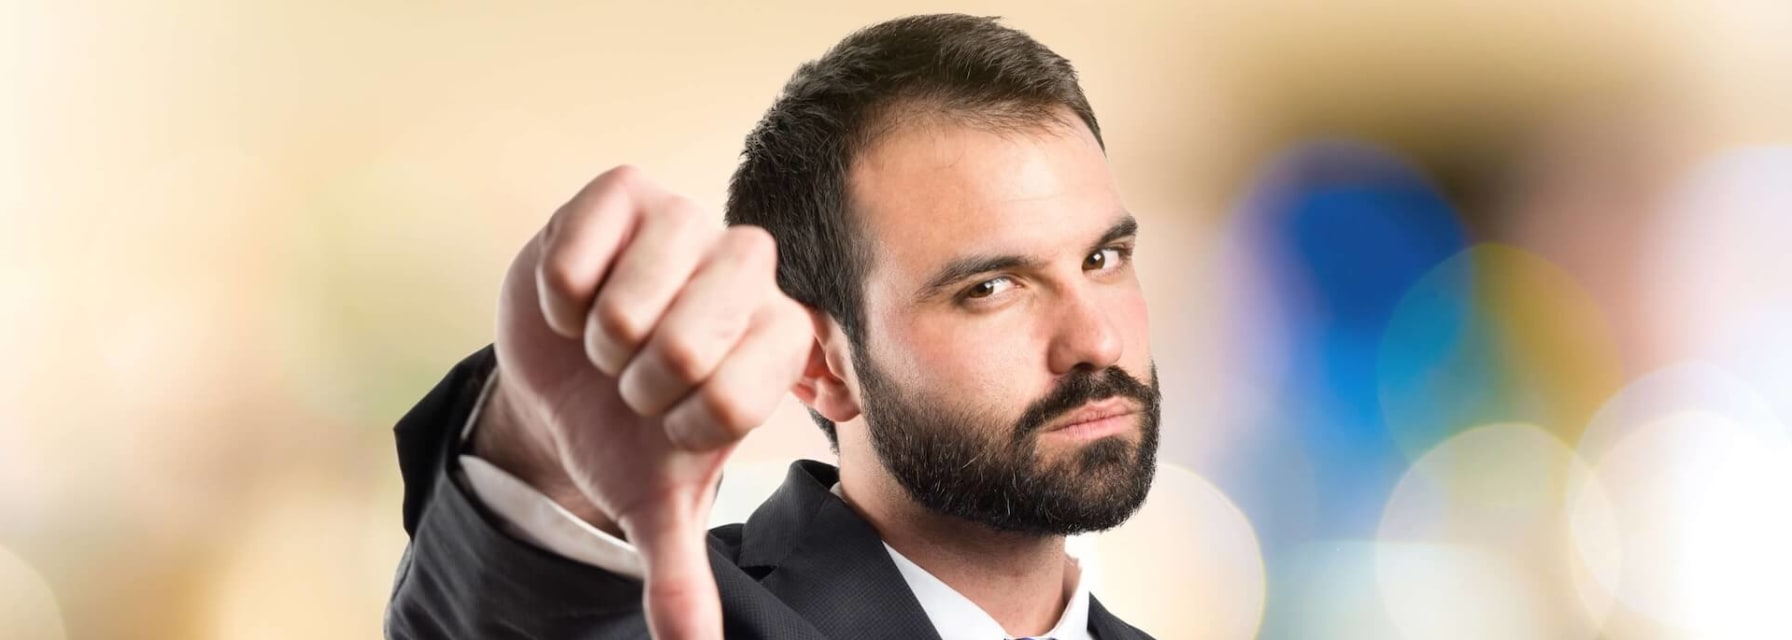 Man in suit with thumb pointing down